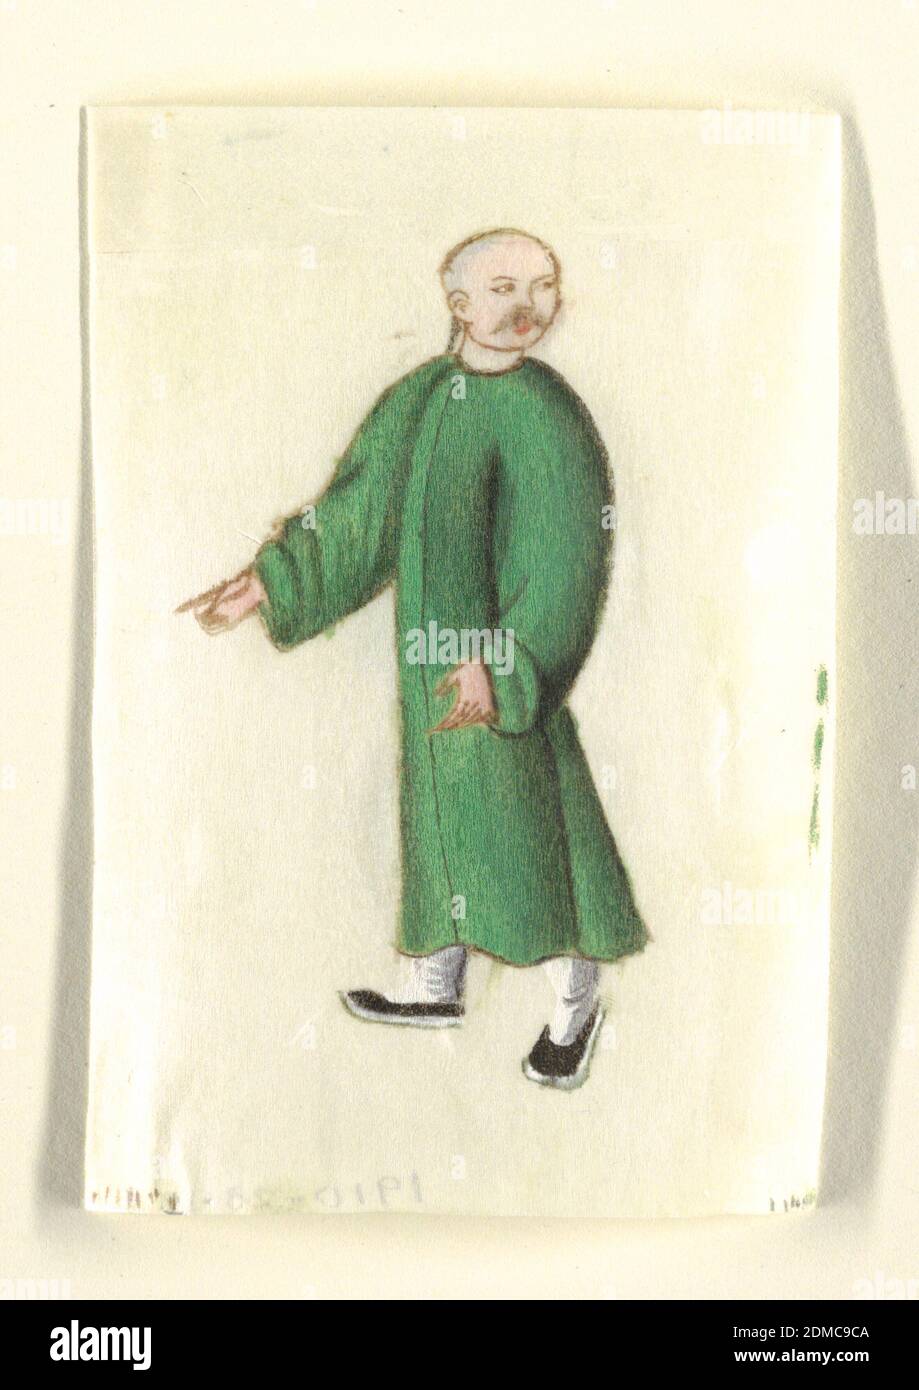 Standing Peasant, Brush and watercolor on rice paper, A standing peasant, walking left, his gaze directed over his left shoulder, wears a long green tunic, and head shaved., China, mid-19th century, Painting, Painting Stock Photo